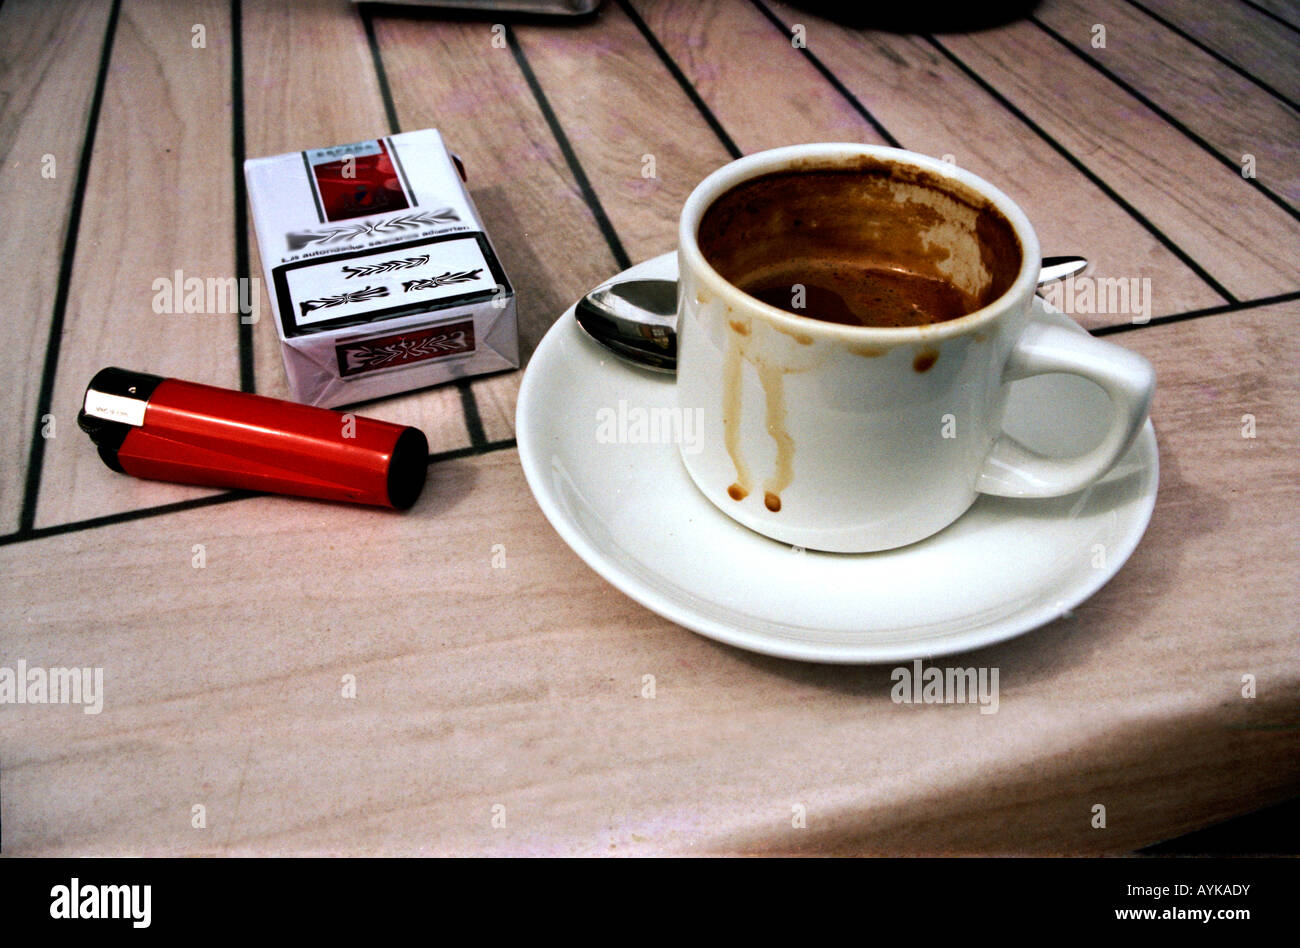 Coffee cup cigarettes and lighter on cafe table Stock Photo